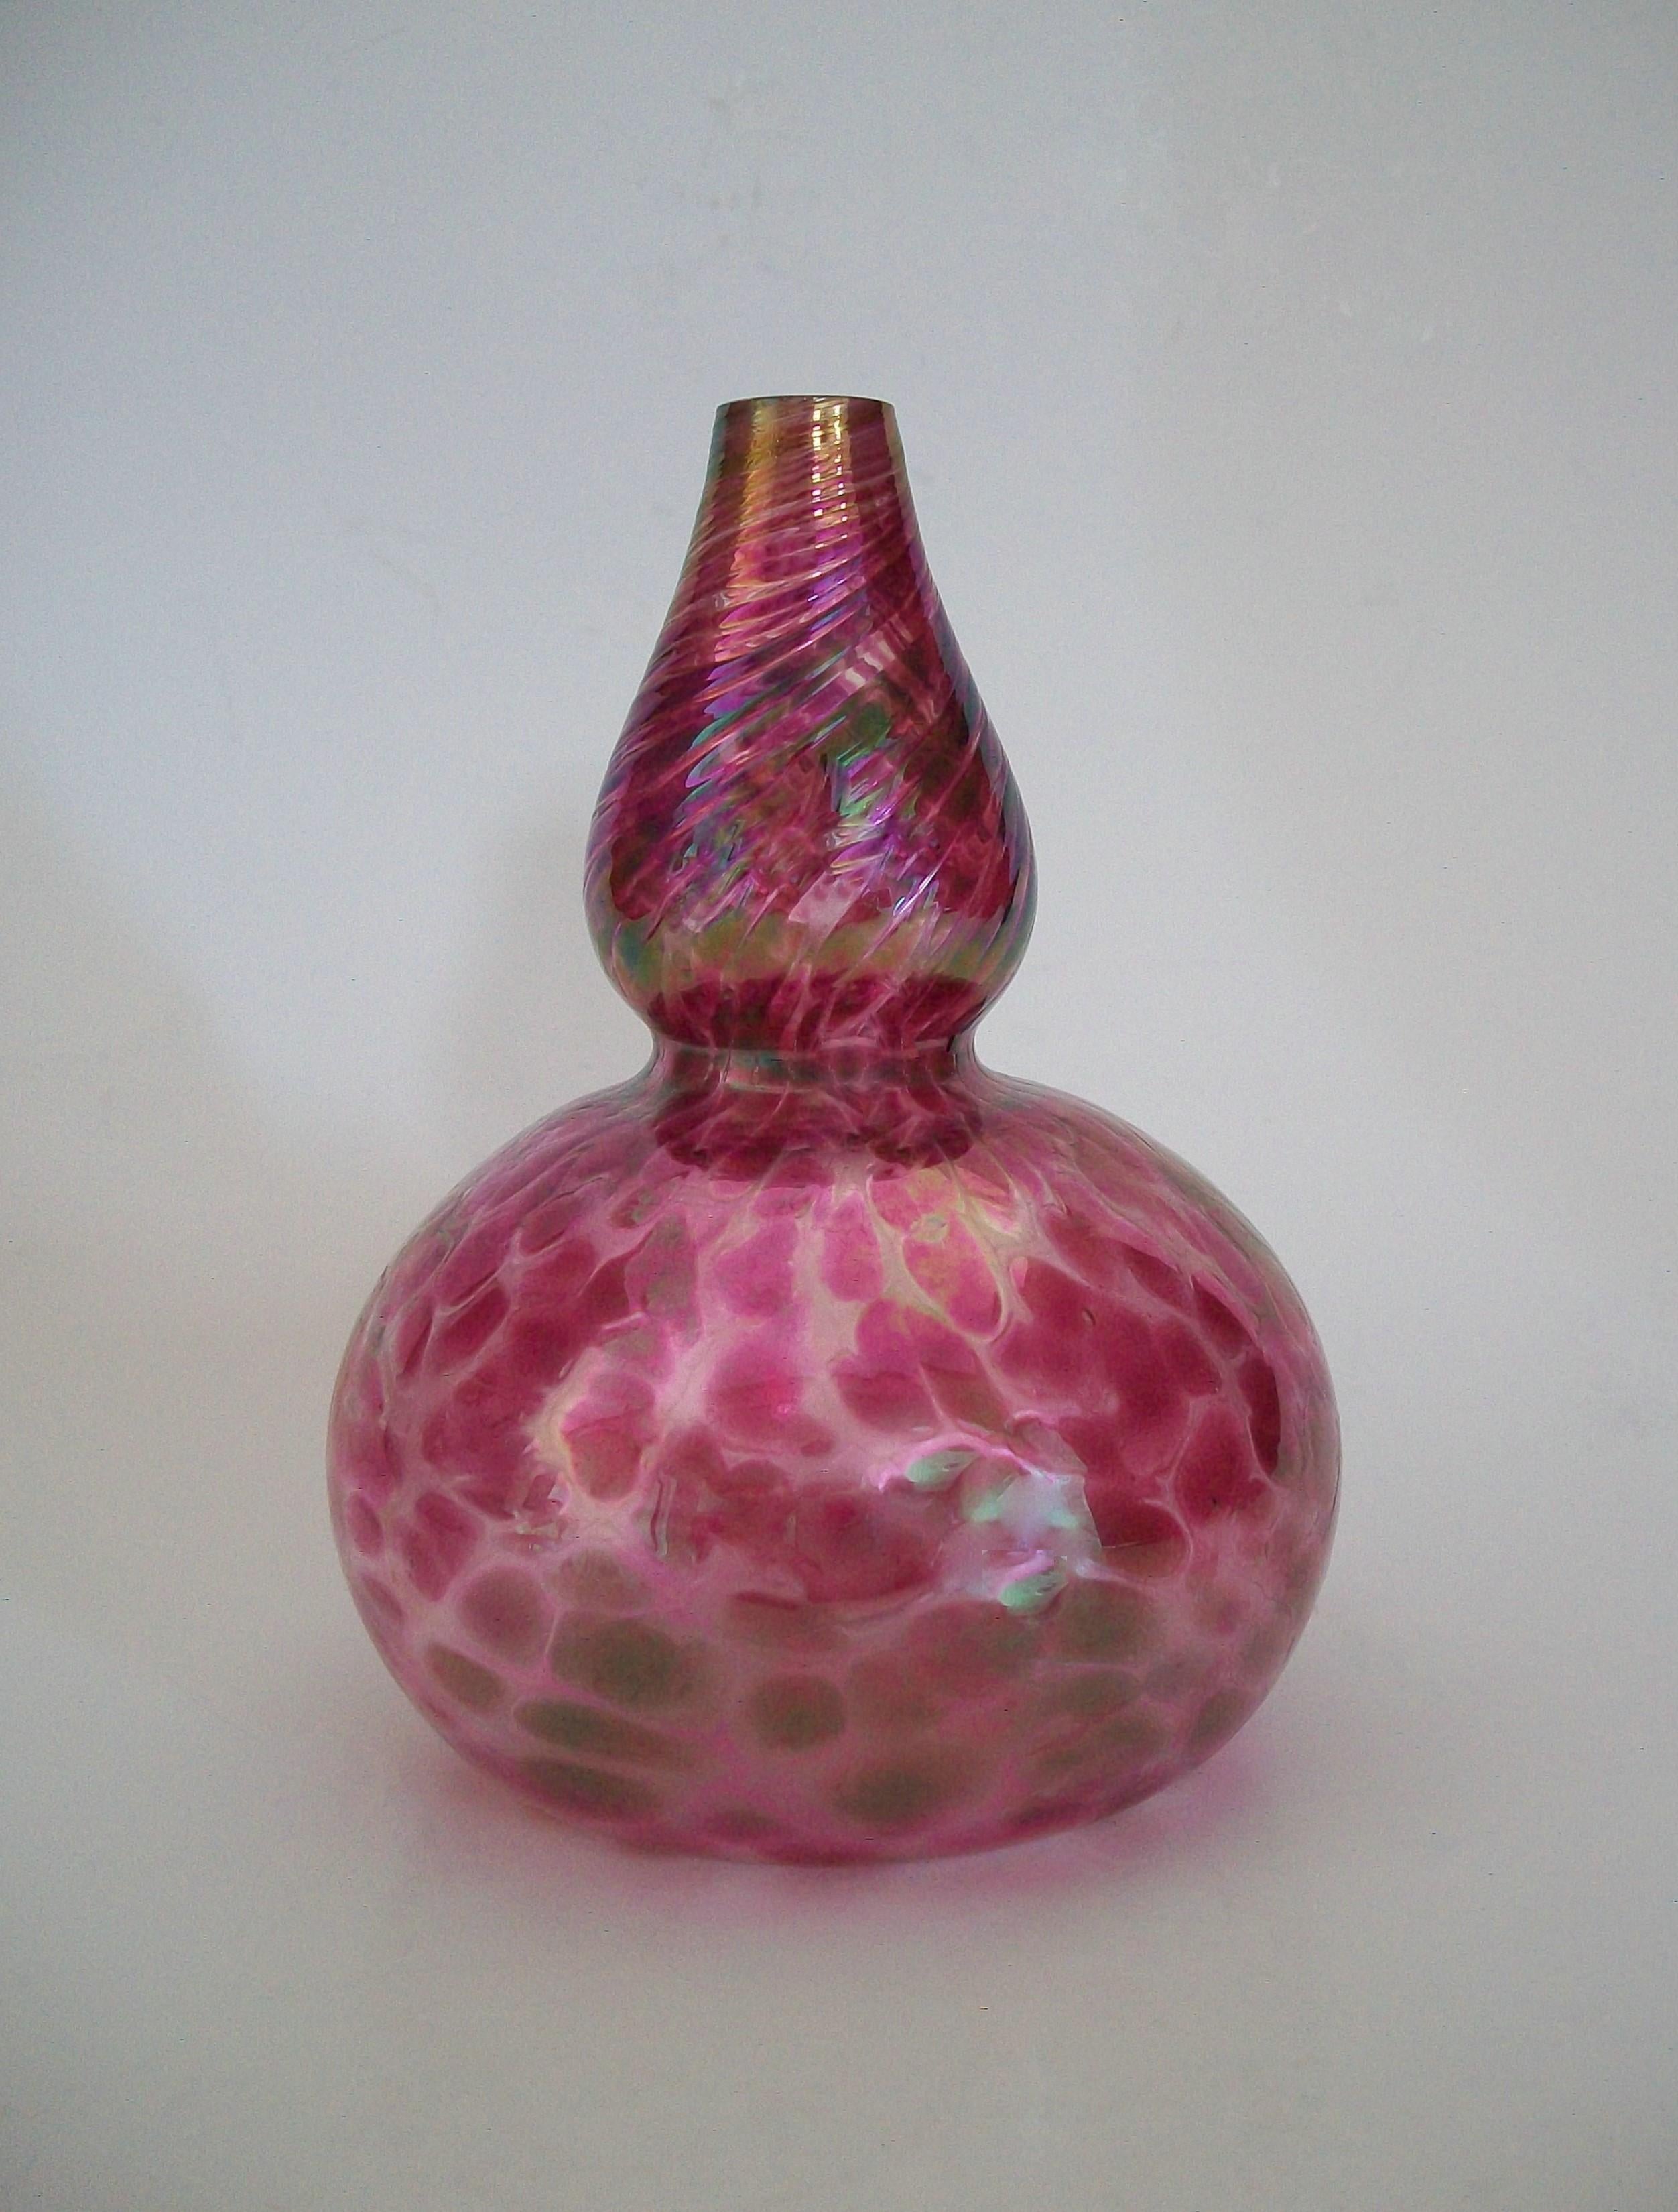 Jan Benda - Krystyna glass - Canadian iridescent studio glass double gourd vase - fine quality with excellent iridescence - signed on the base - Canada (British Columbia) - circa 2000.

Excellent pre-owned condition - no loss - no damage - no